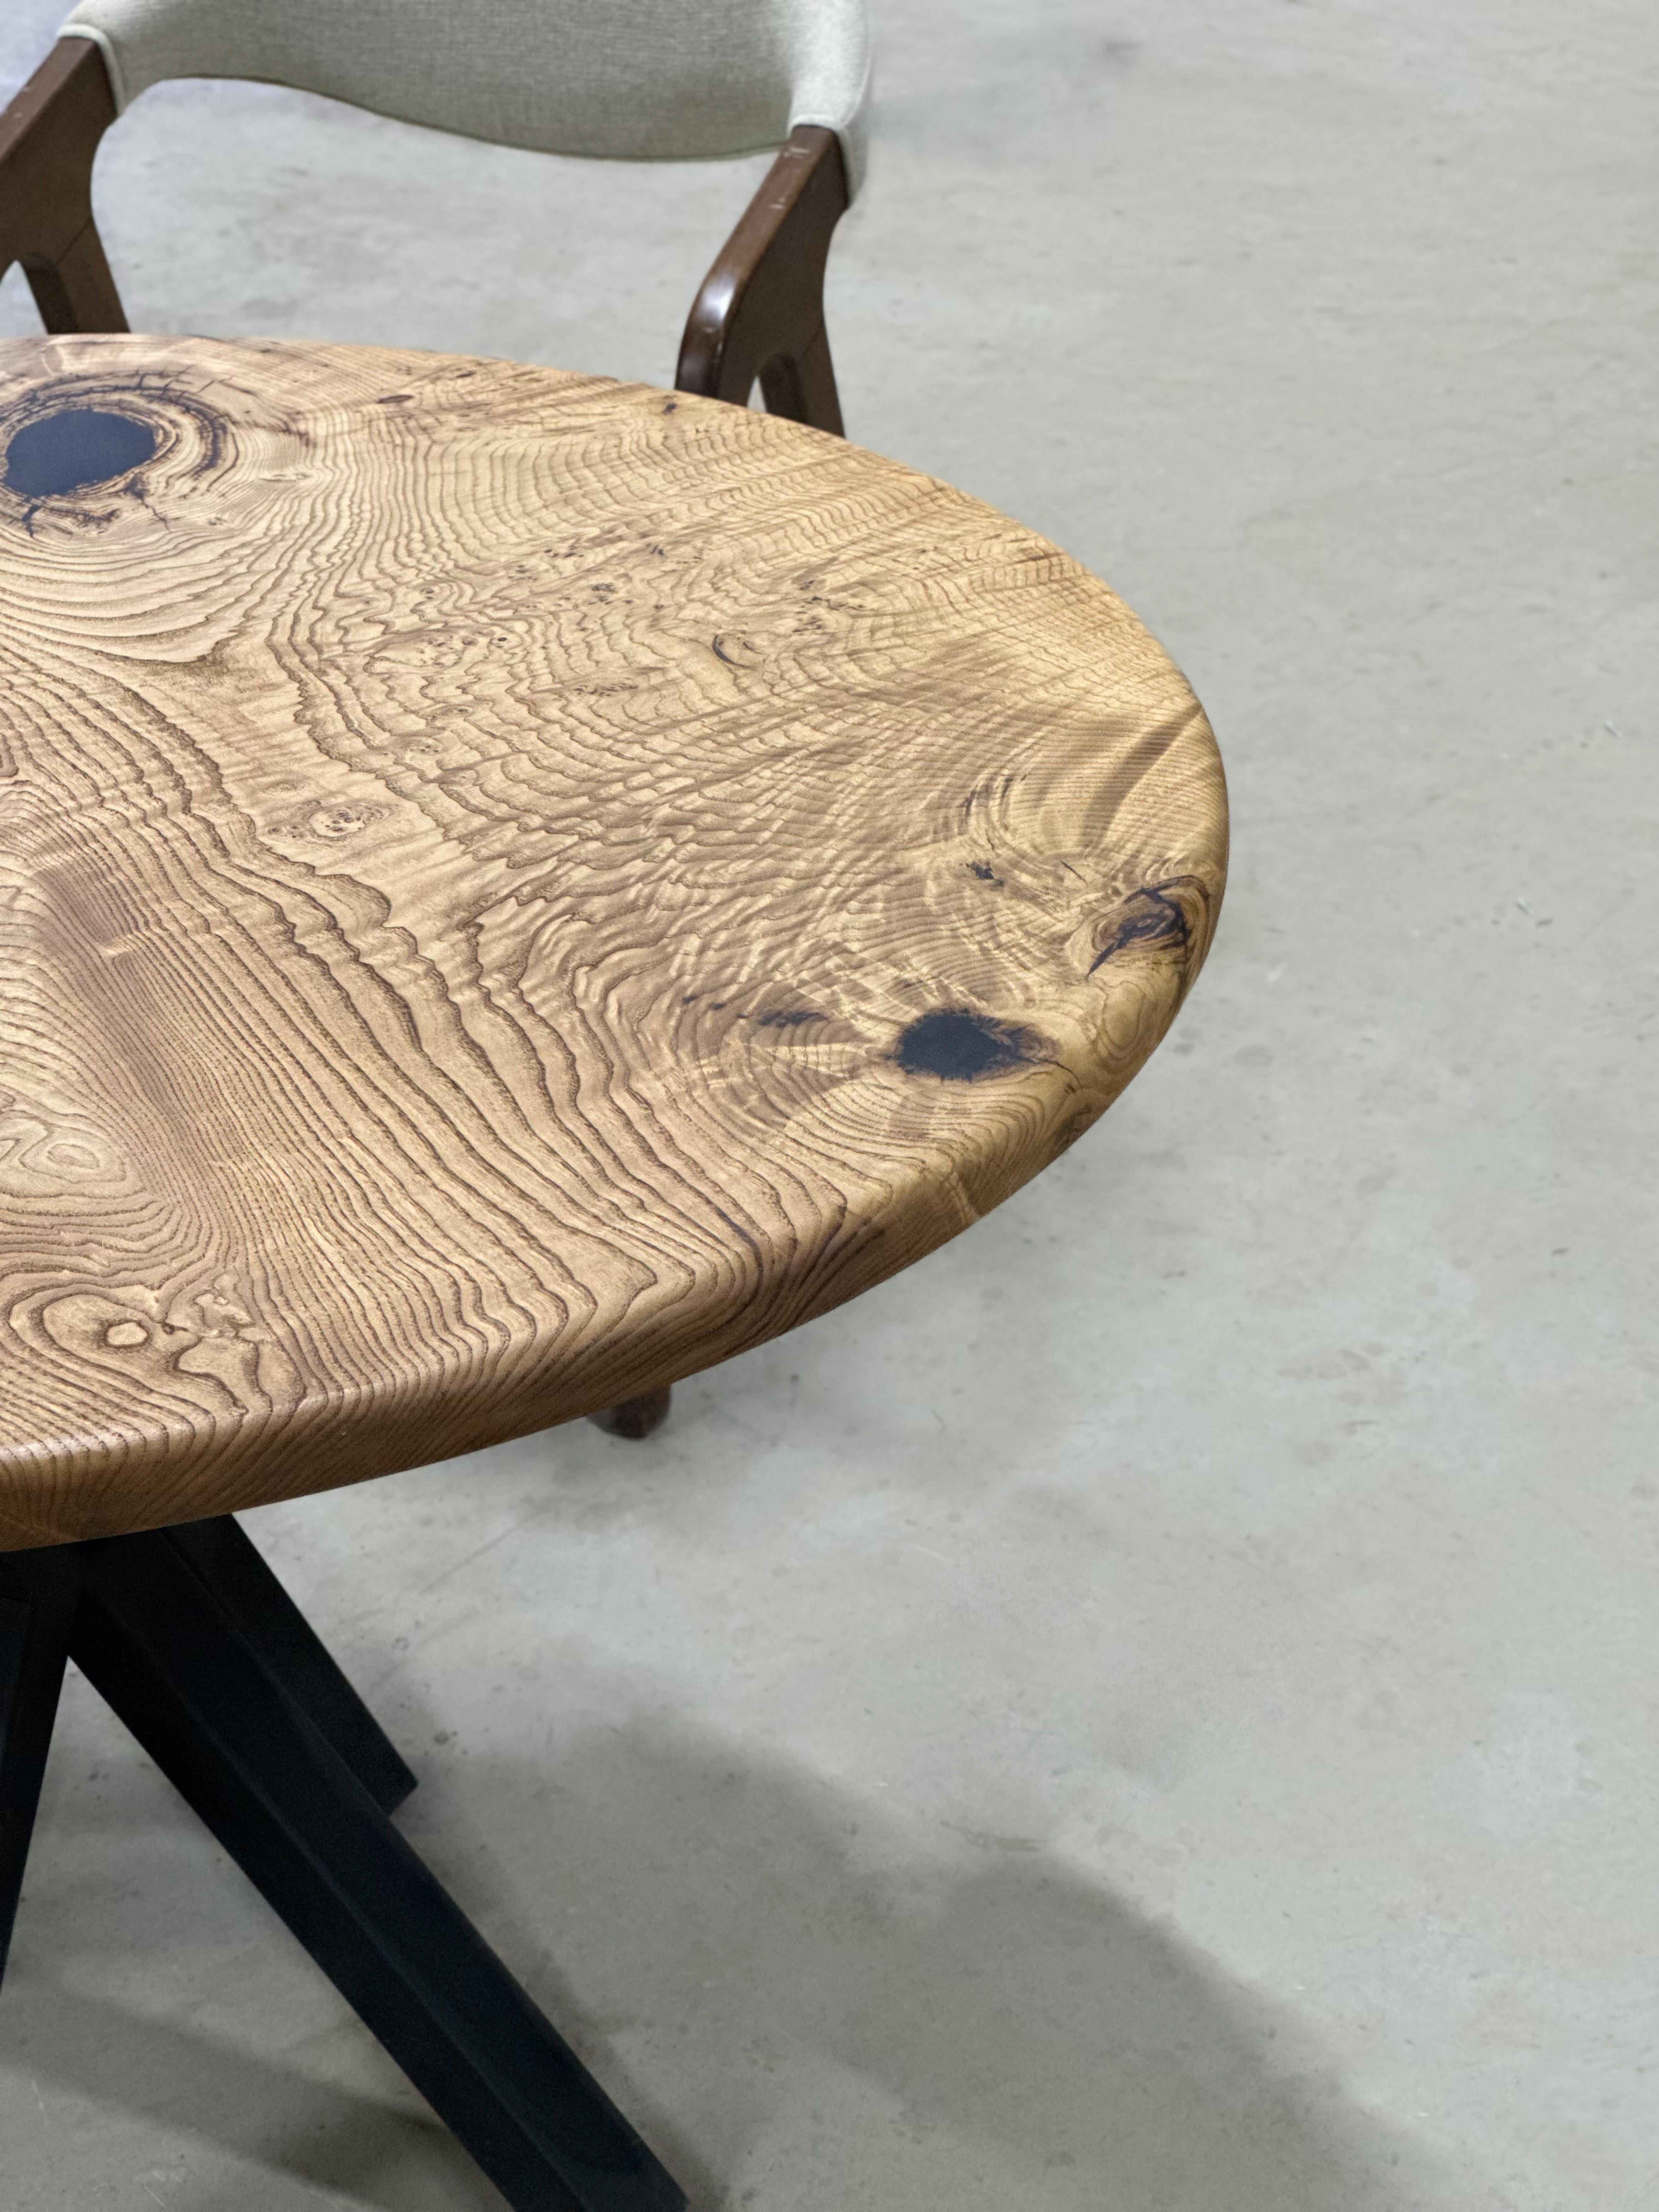 Chestnut Round Dining Table 

This table is made of 500 years old chestnut wood. The grains and texture of the wood describe what a natural chestnut woods looks like.
It can be used as a dining table or as a conference table. Suitable for indoor